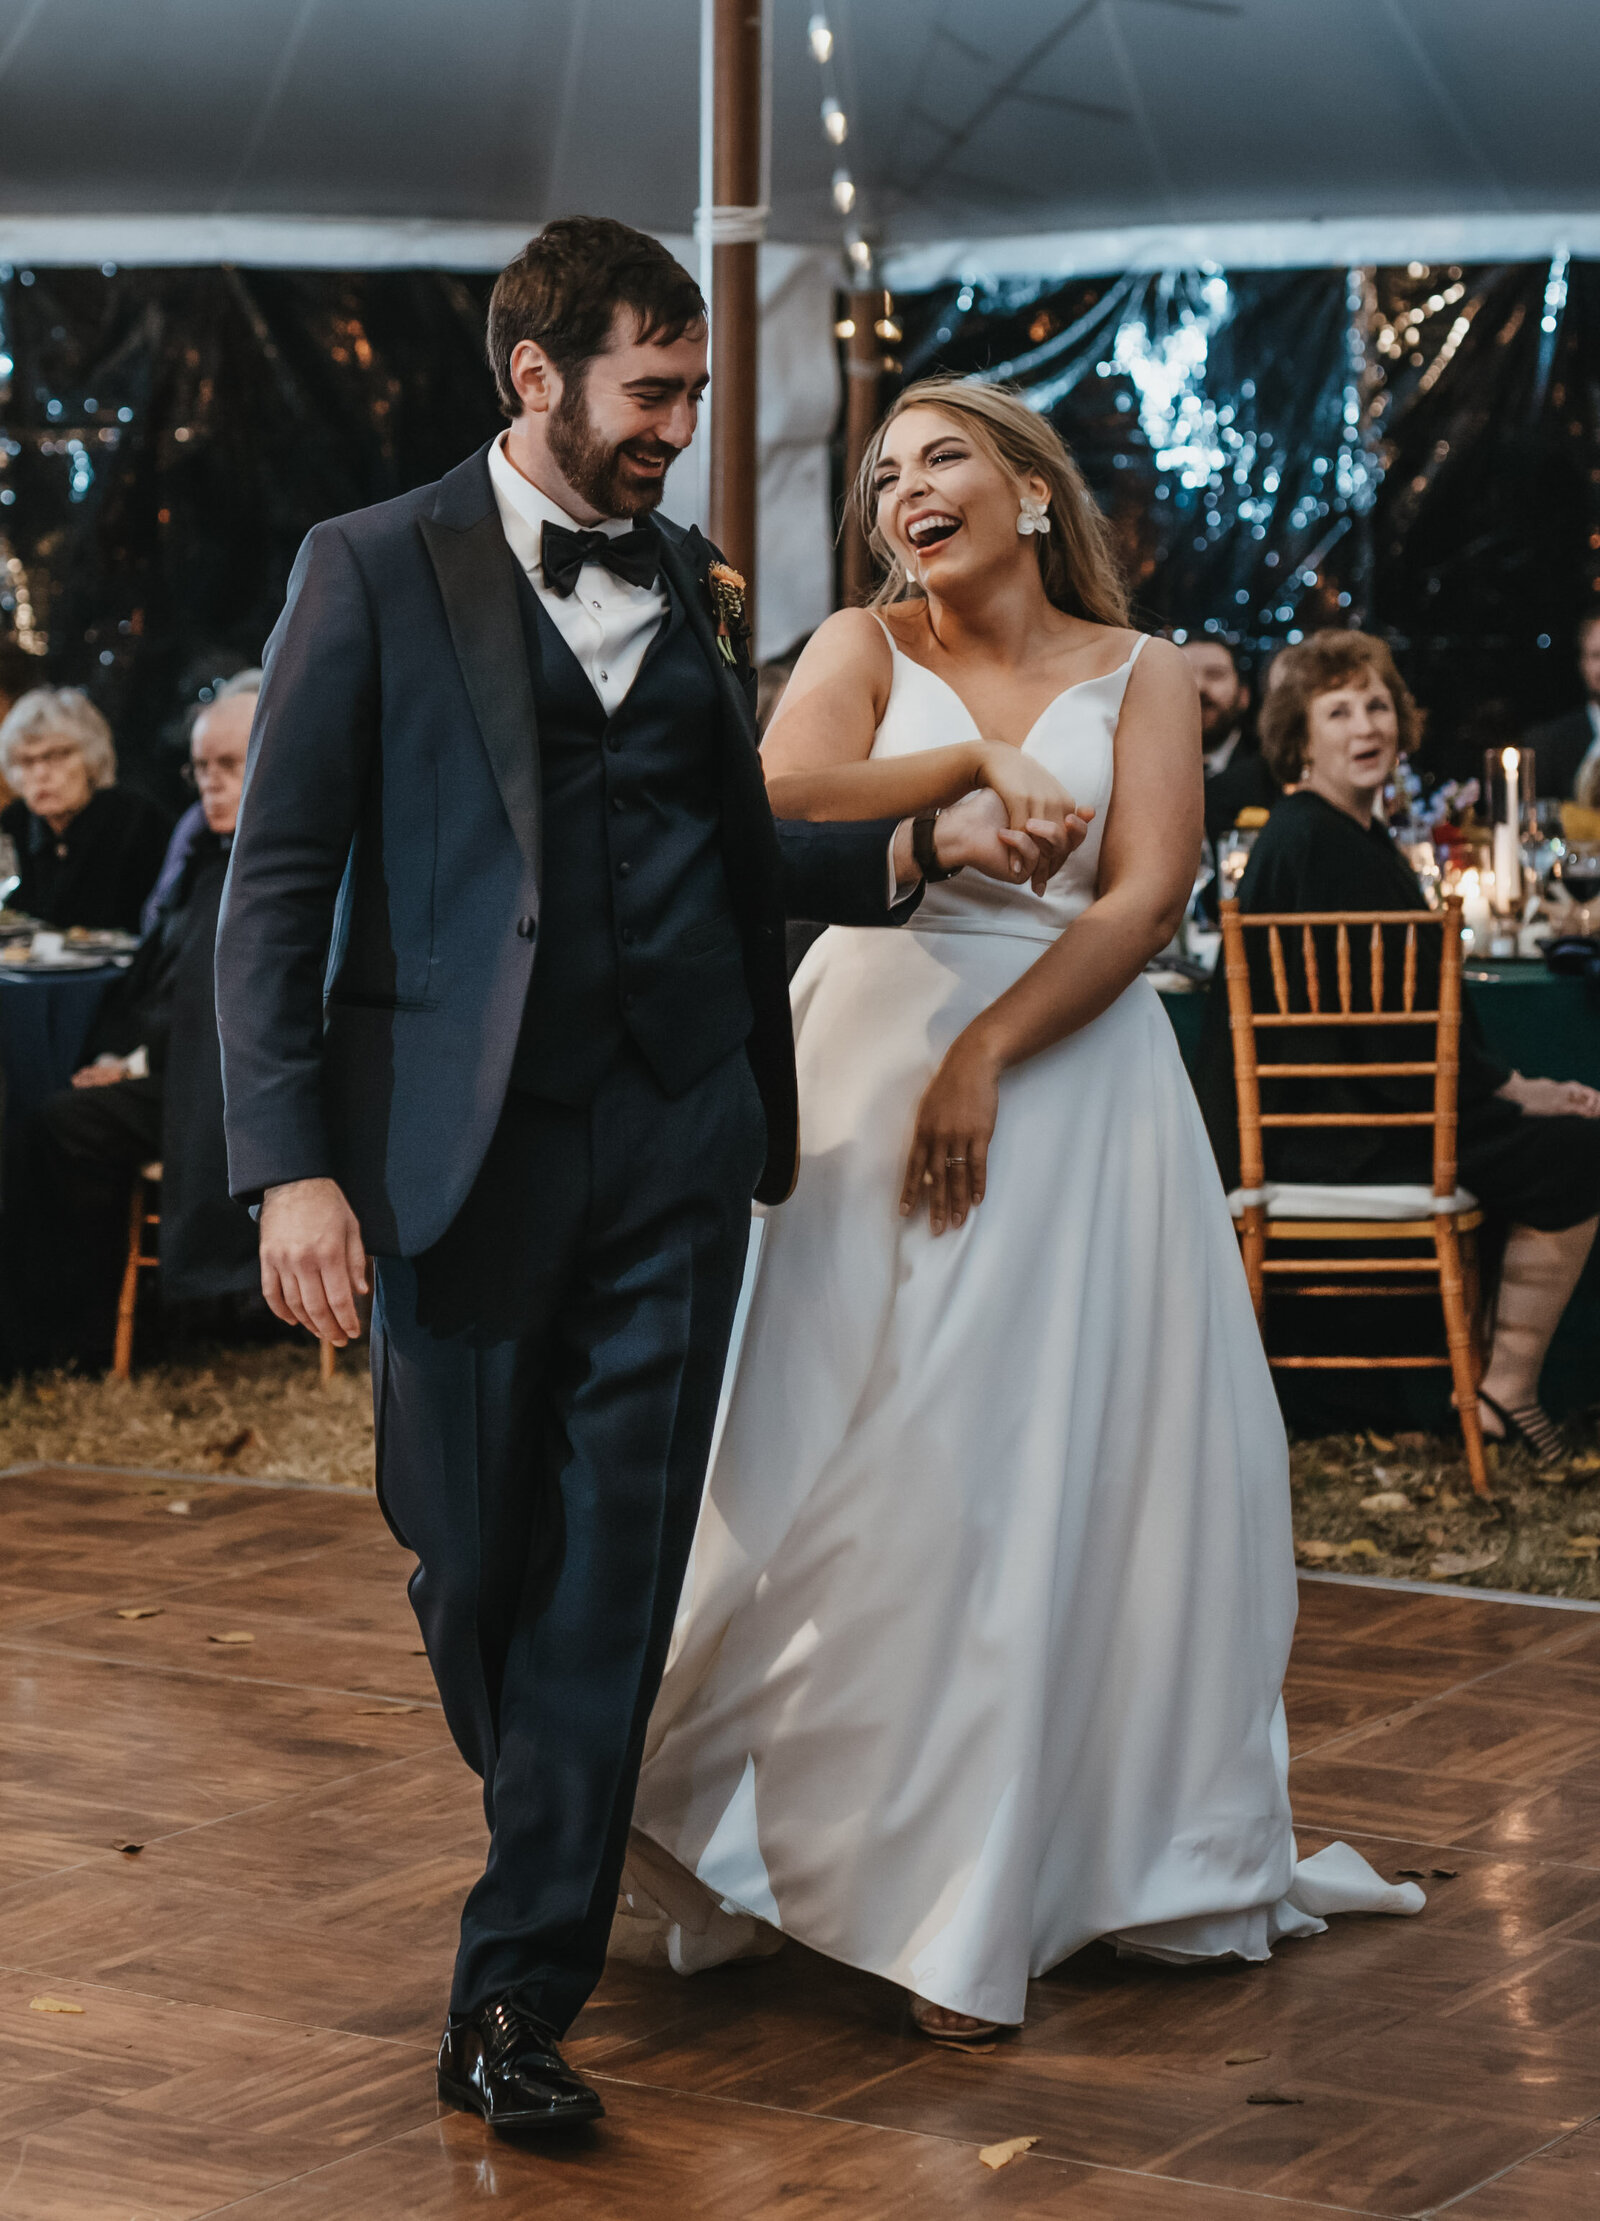 A bride and groom laugh on the dance floor